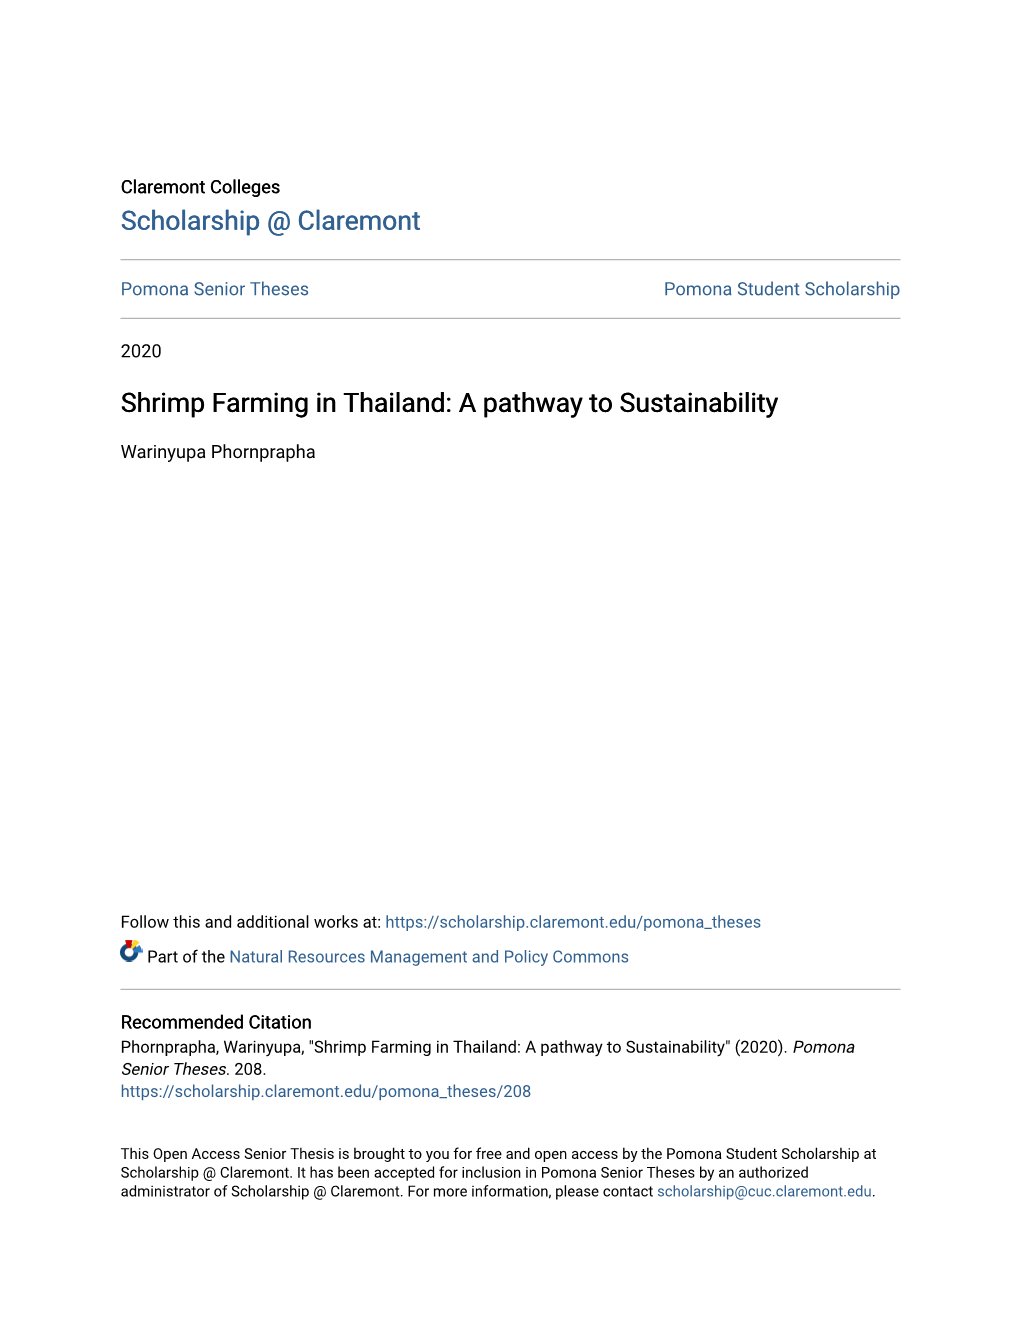 Shrimp Farming in Thailand: a Pathway to Sustainability